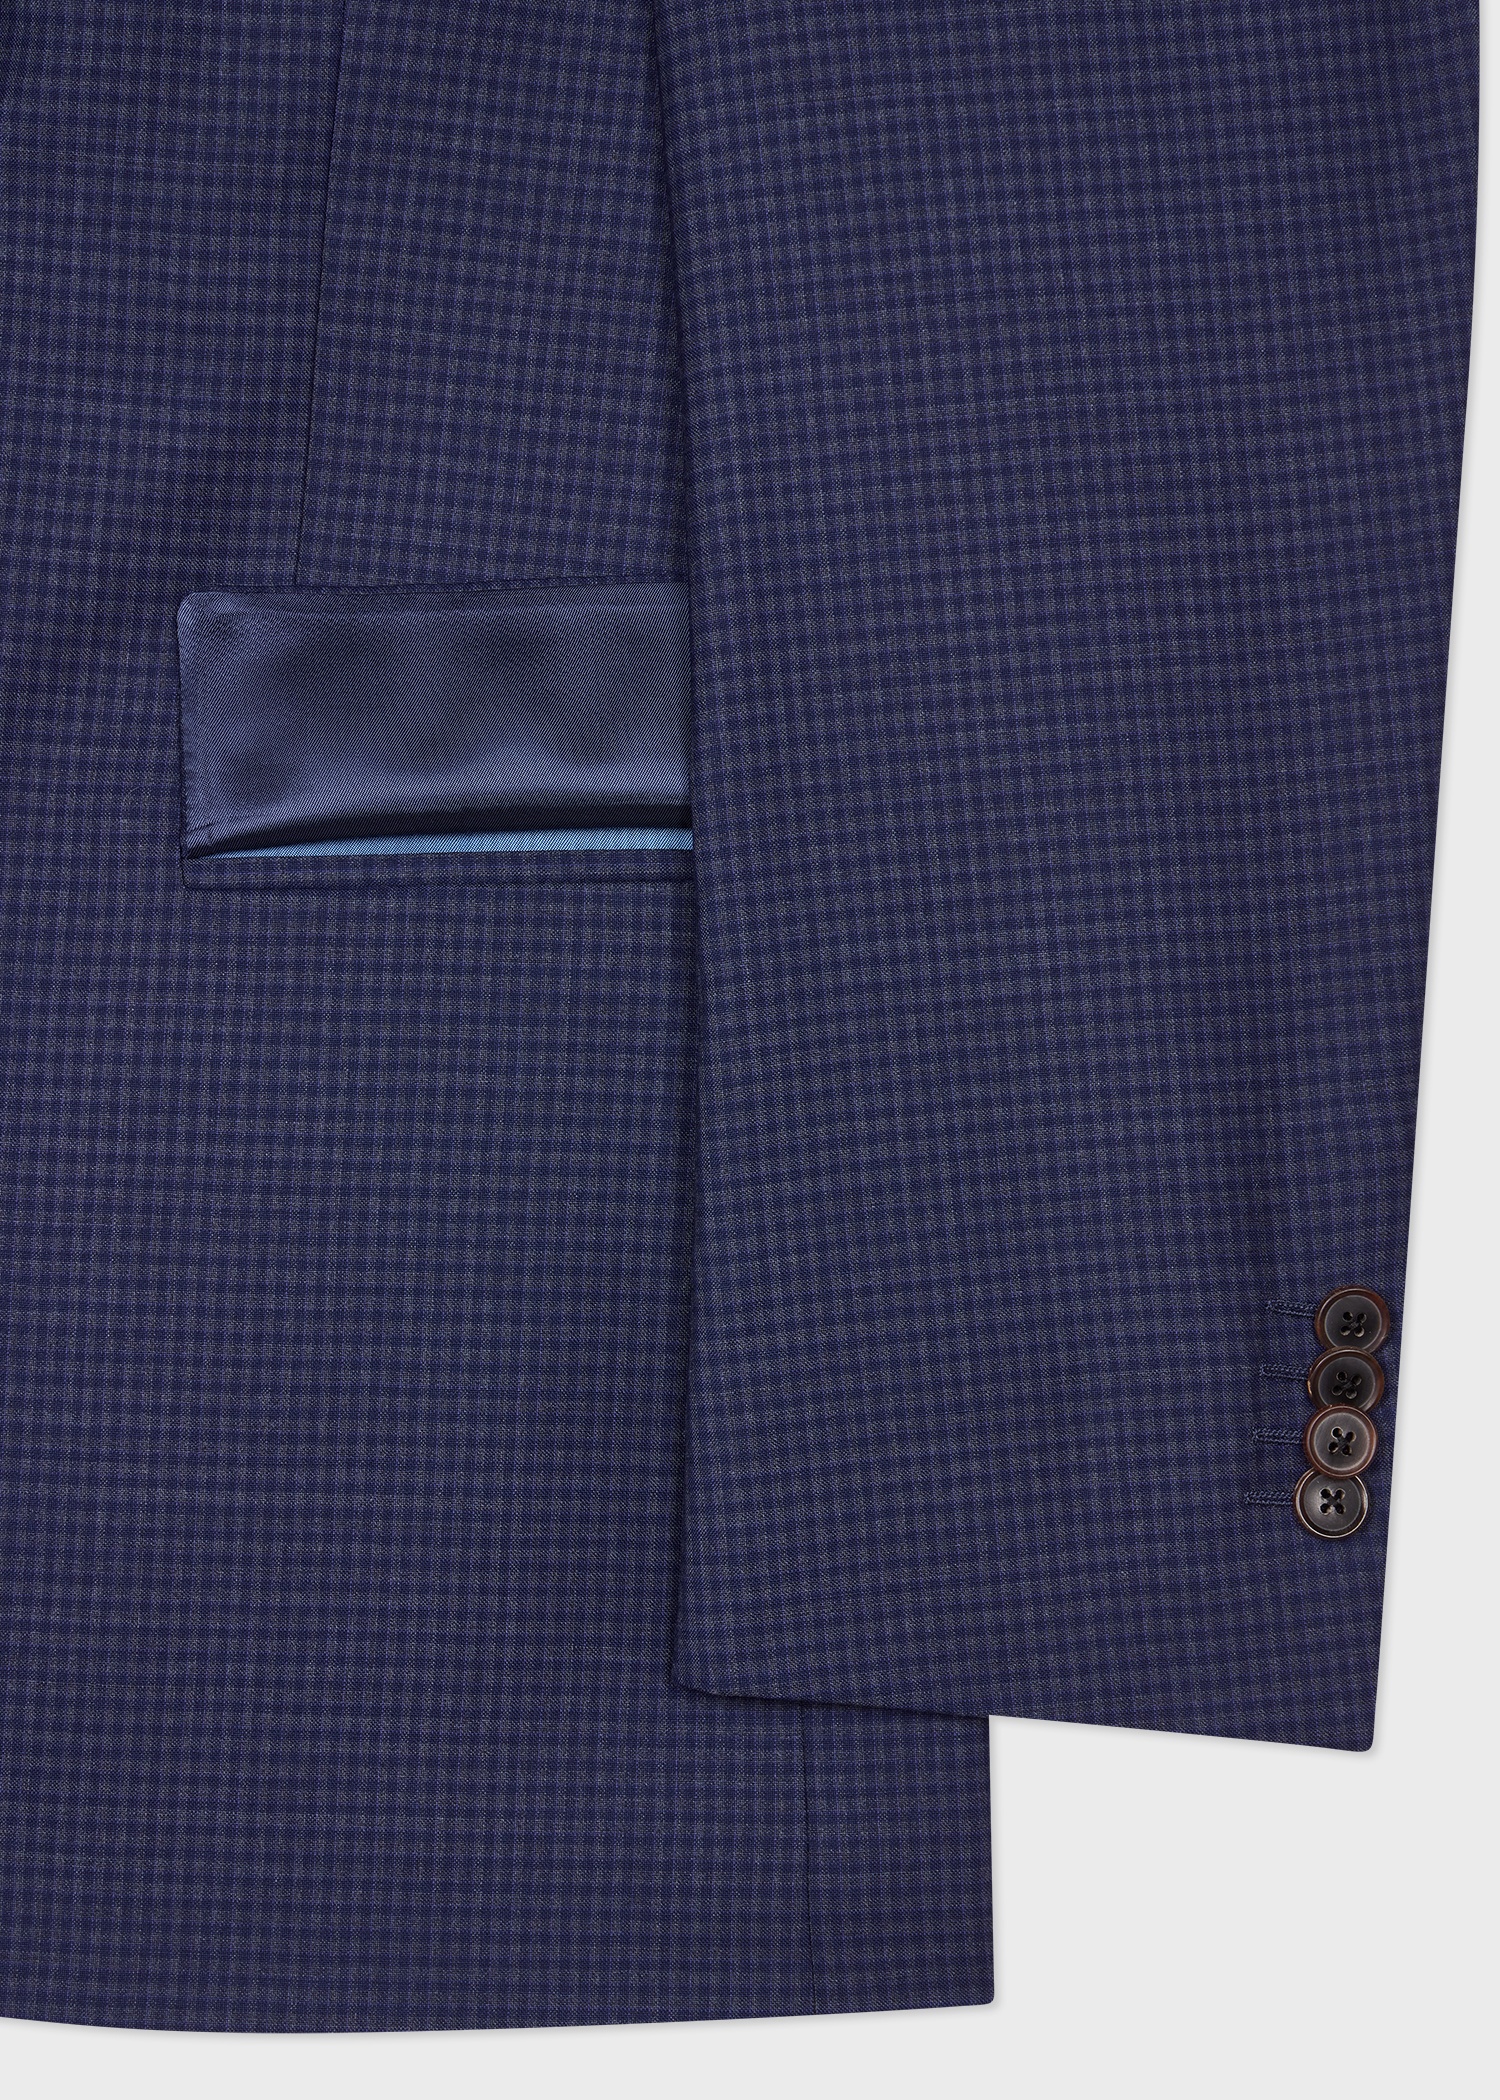 The Soho - Tailored-Fit Blue Gingham Wool Blazer - 3